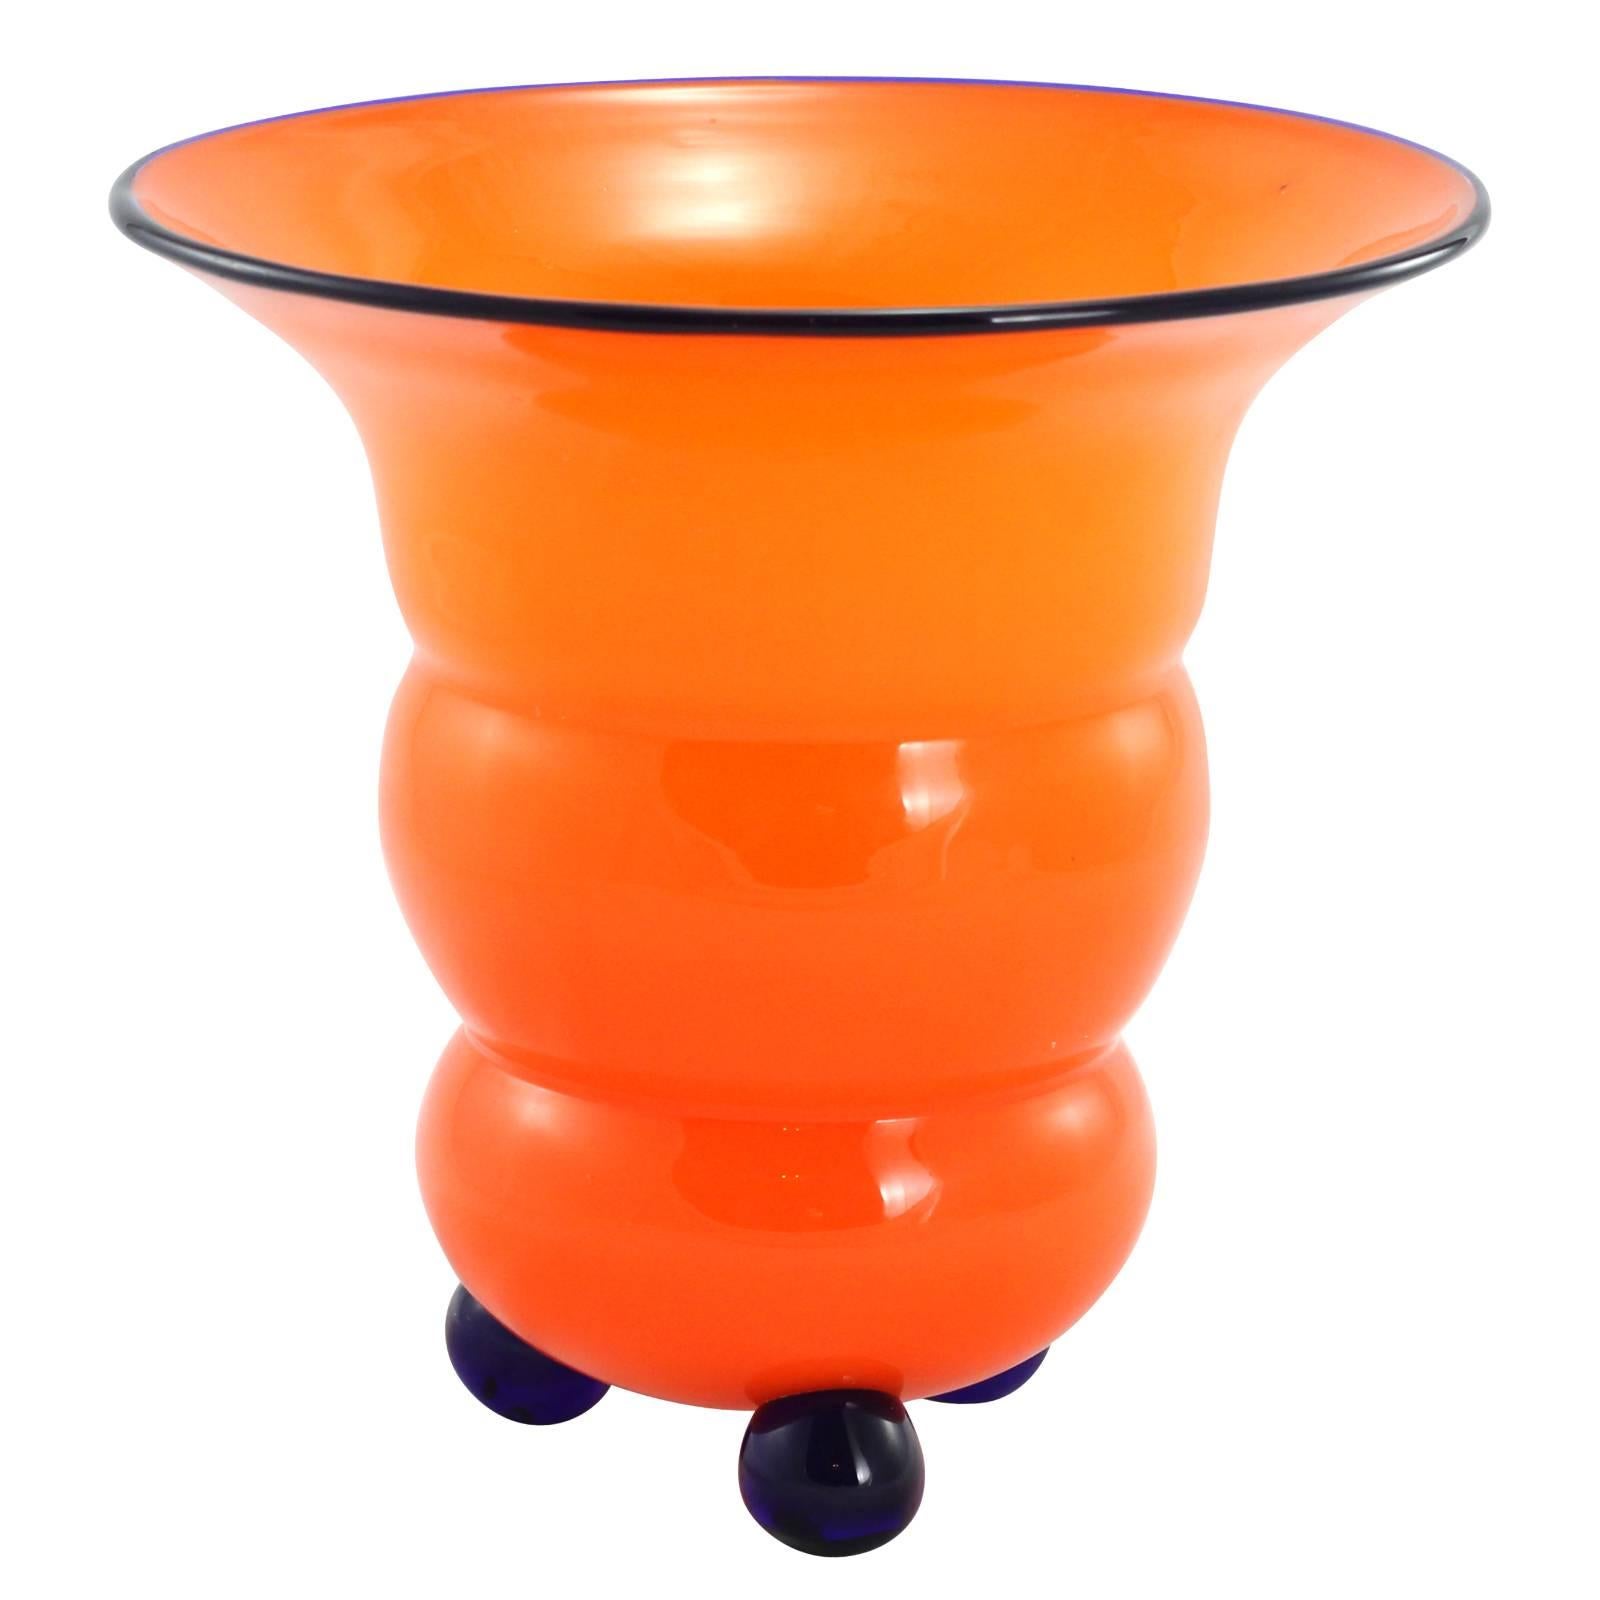 An early 20th century Art Deco ribbed tango glass vase by Loetz. Featuring a bold orange ground, with three cobalt blue ball feet and an applied cobalt blue rim.